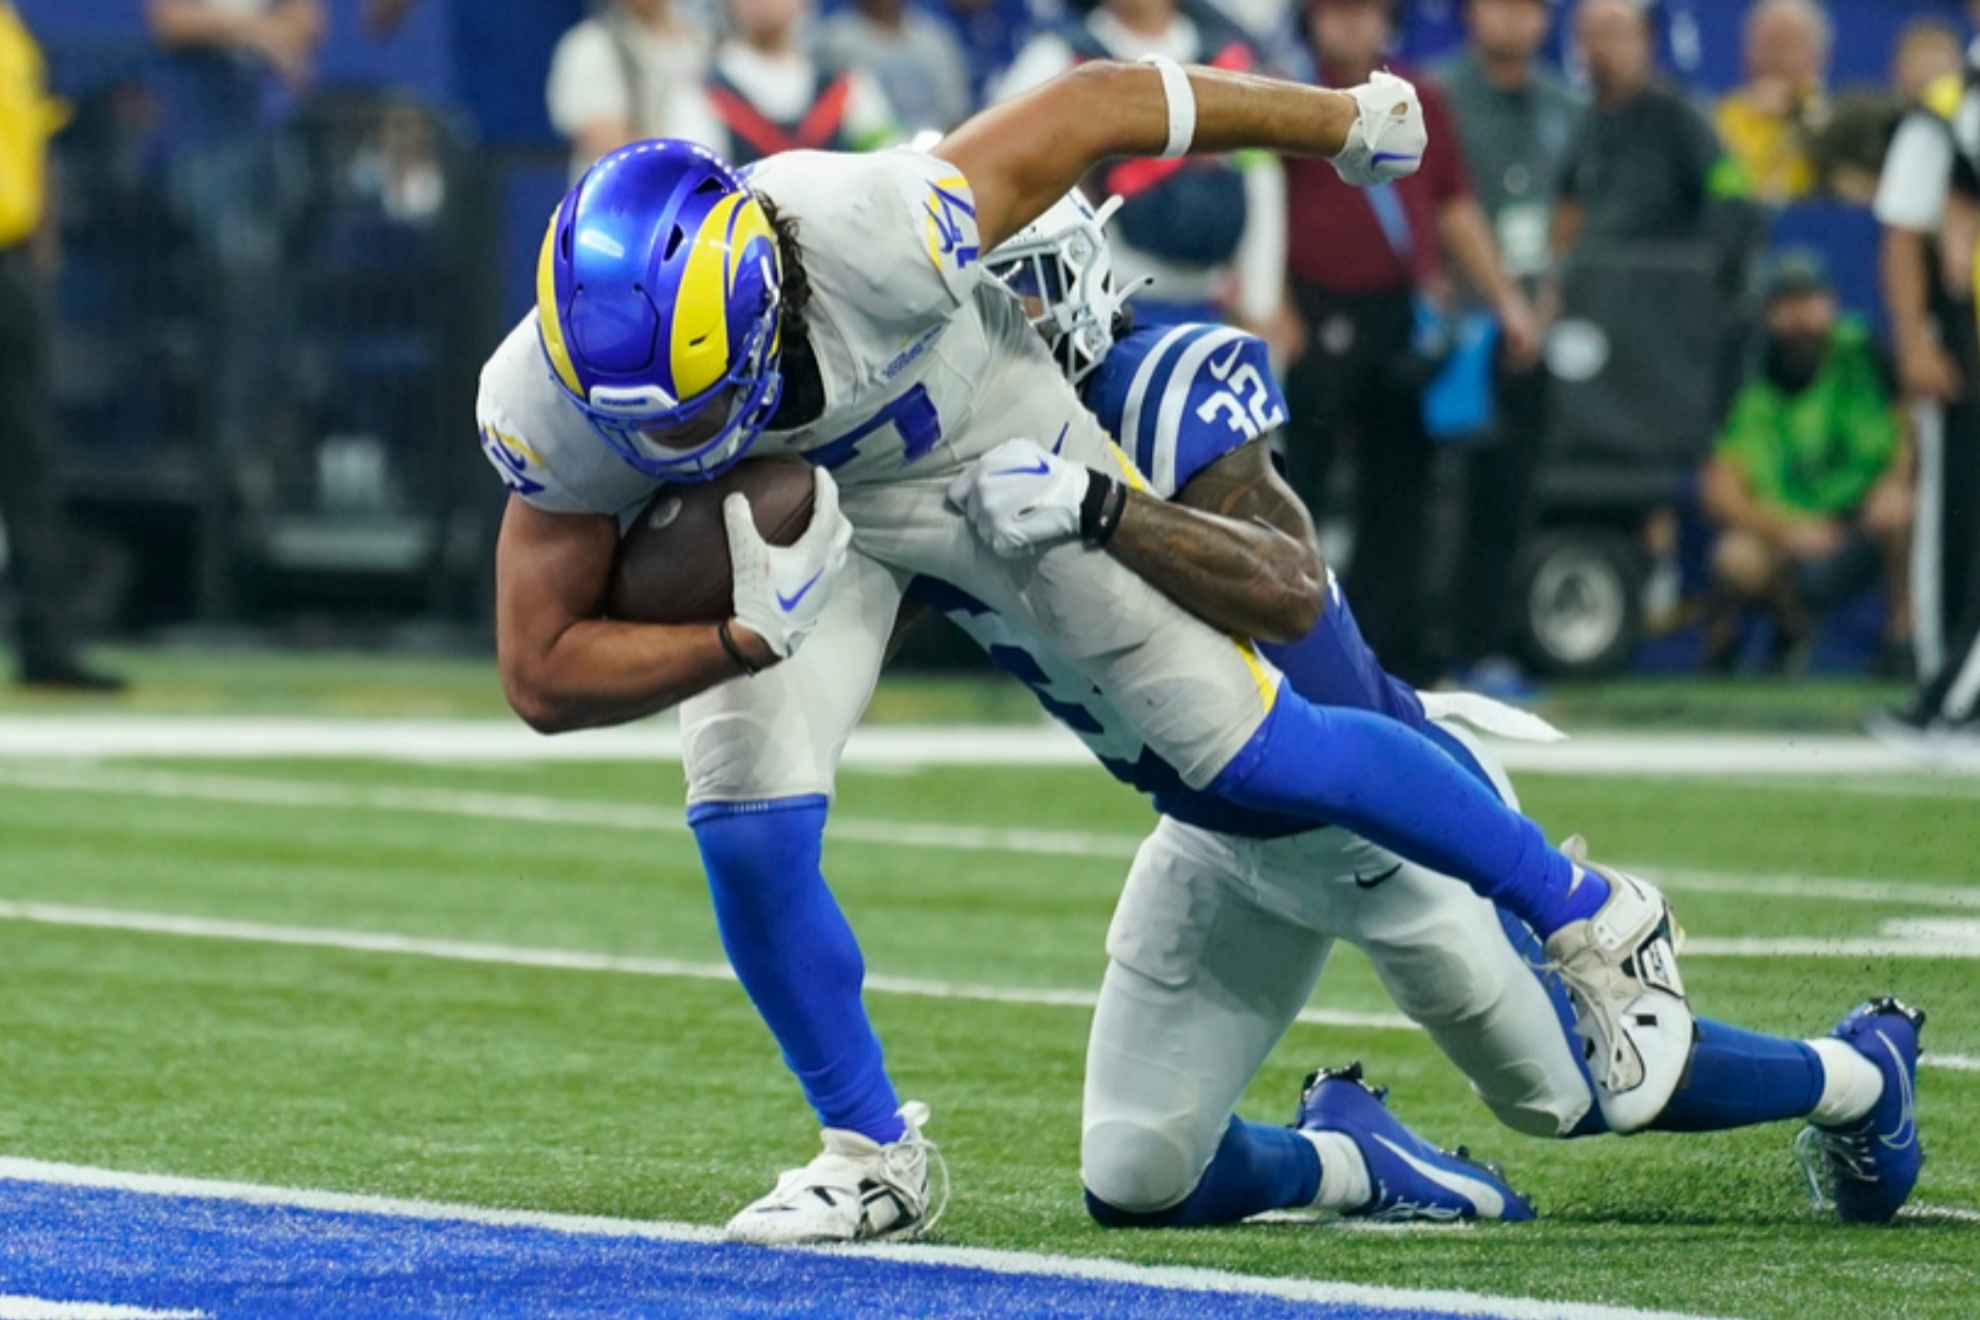 The Rams won in overtime 29-23 against the Colts in Week 4 of the NFL's 2023 season